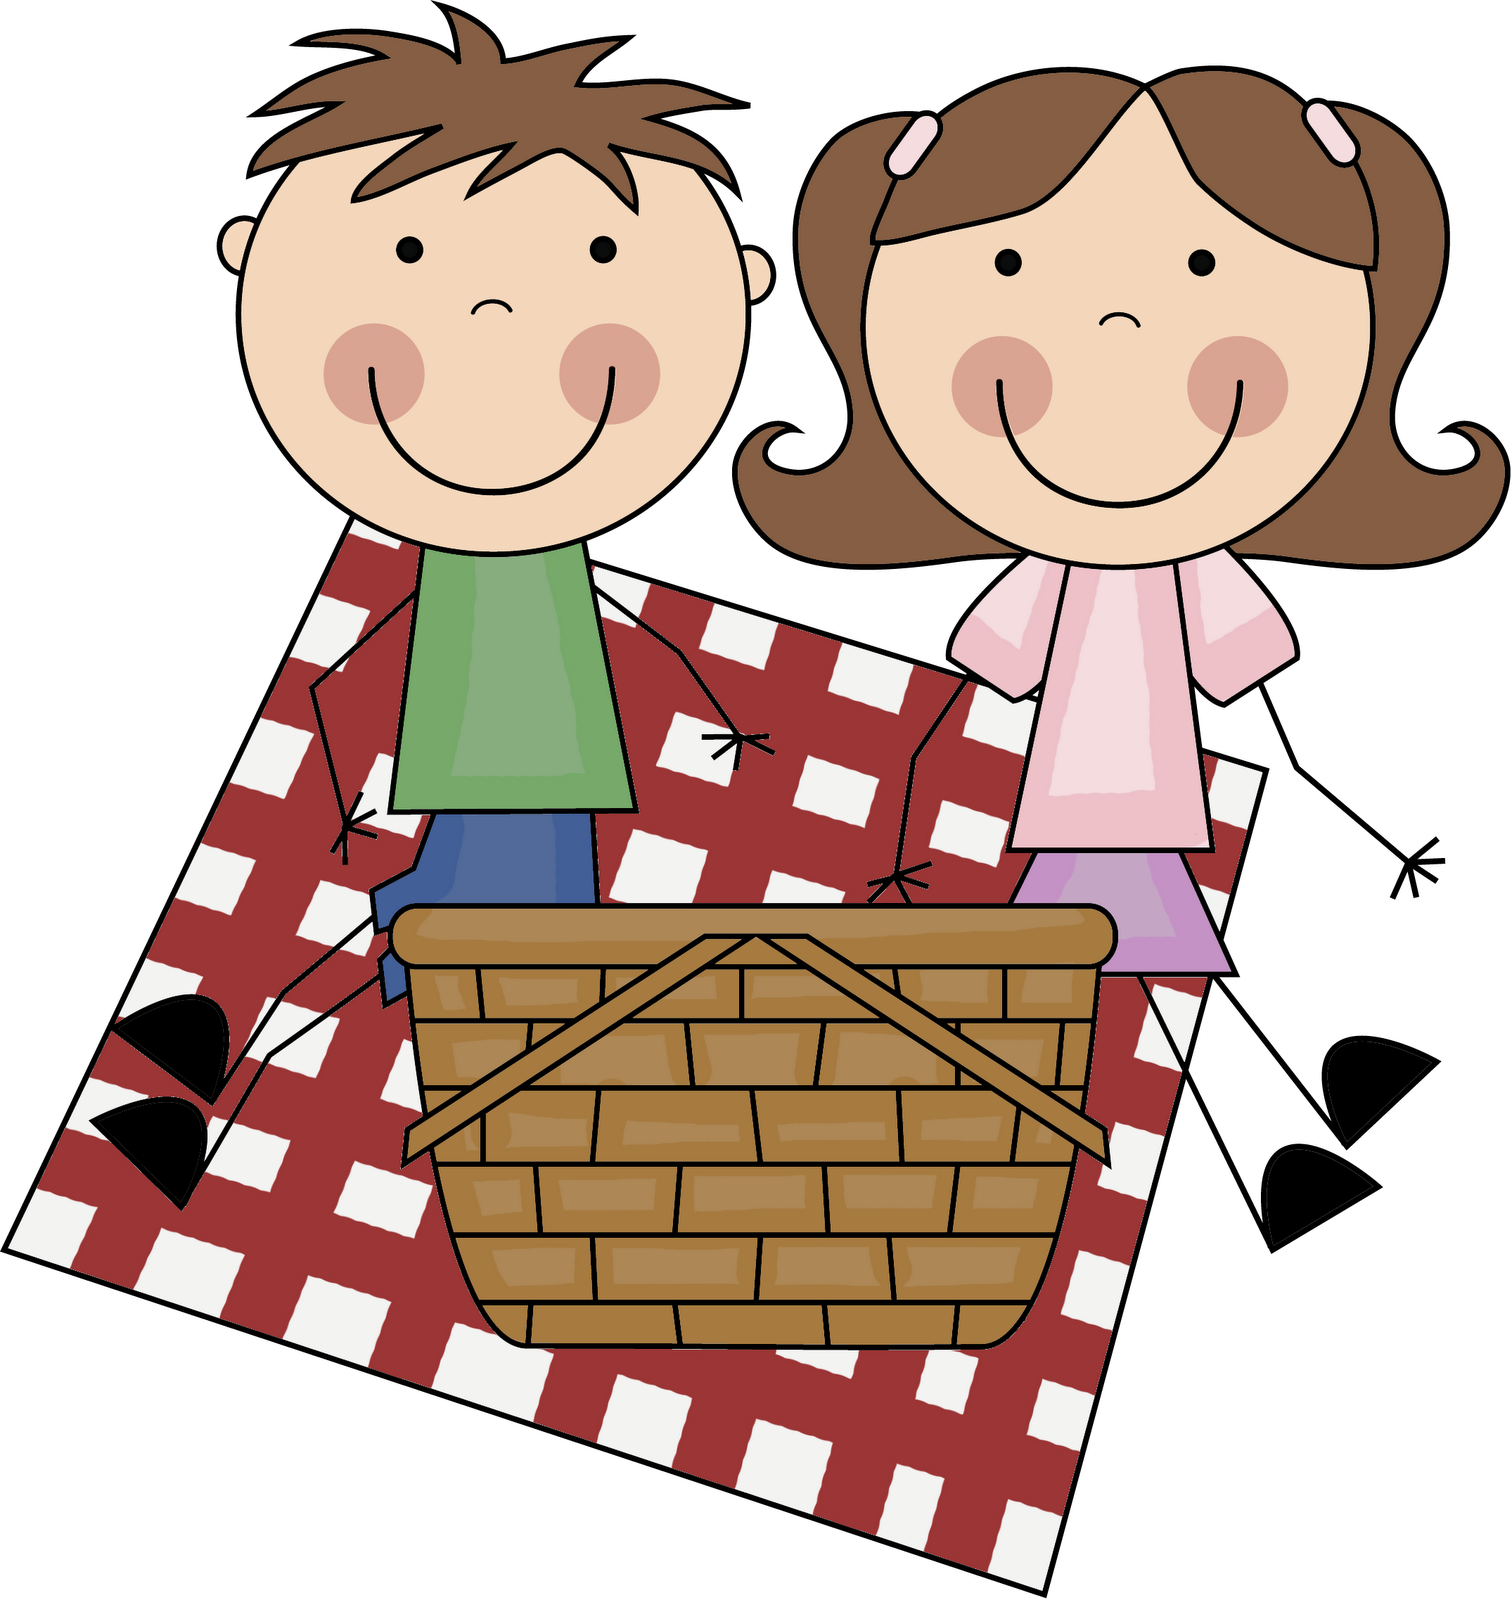 Free Family Picnic Cliparts, Download Free Clip Art, Free.